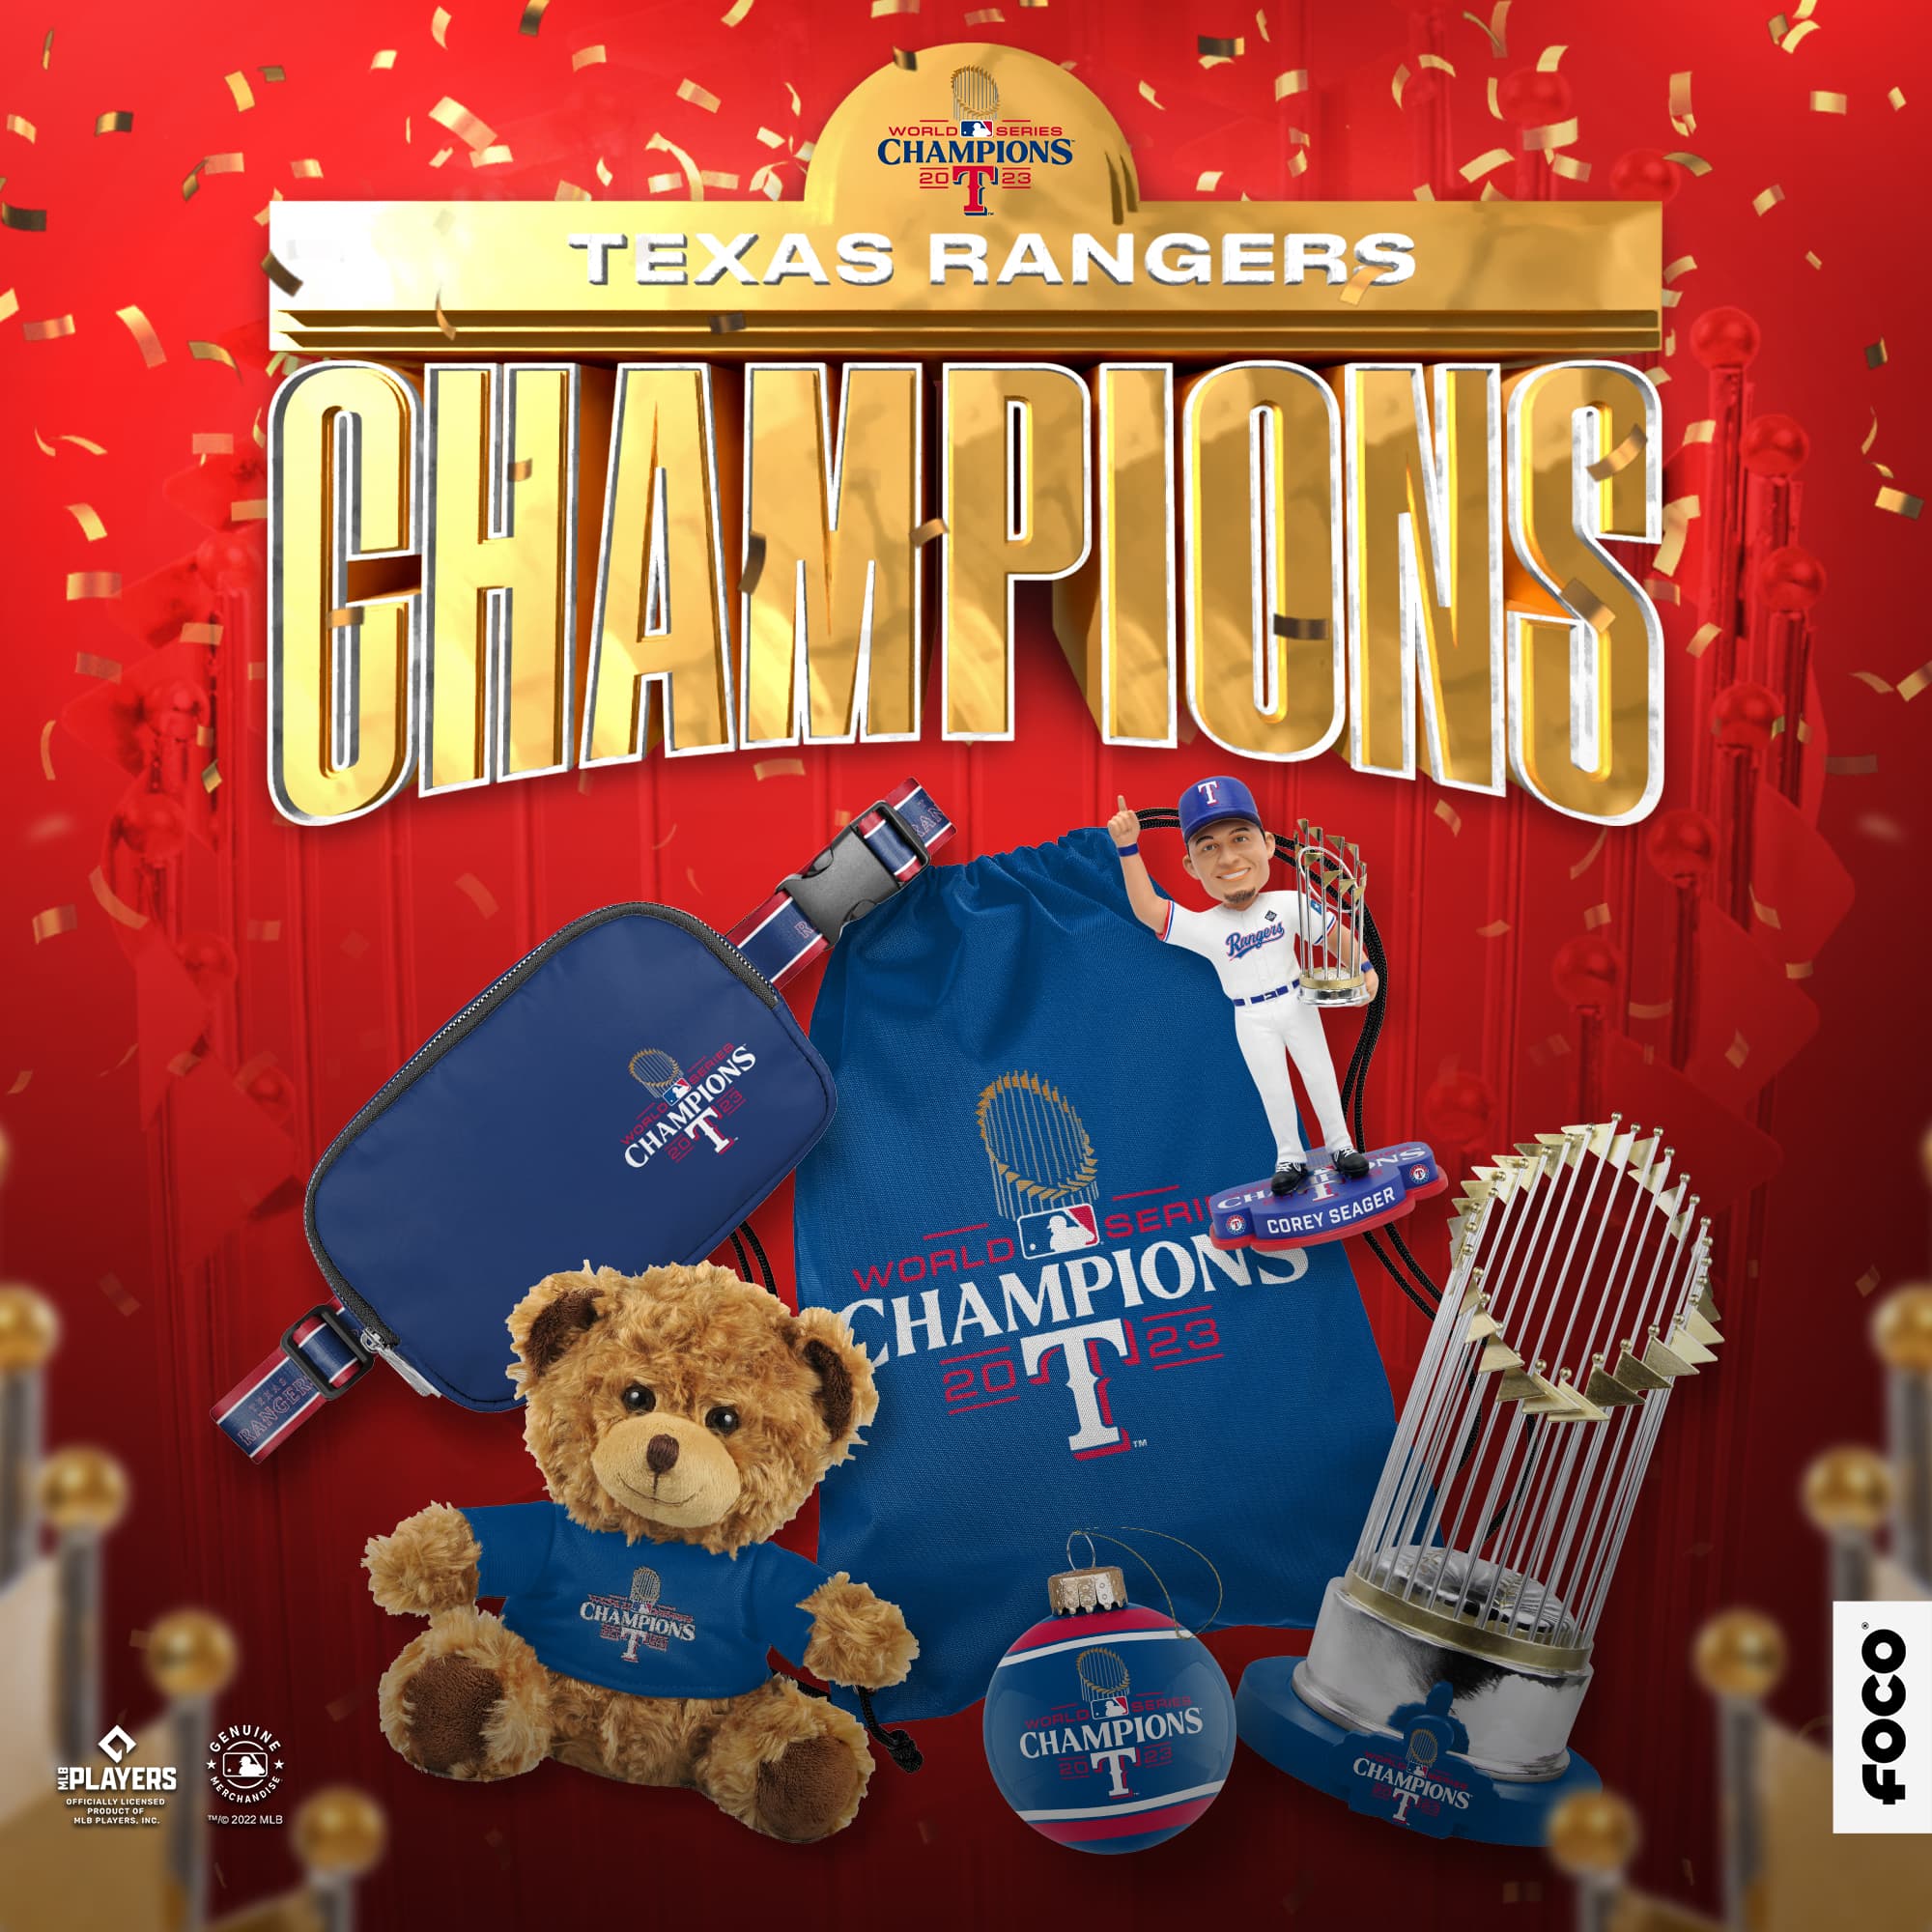 Texas Rangers WS Champions Product Mix